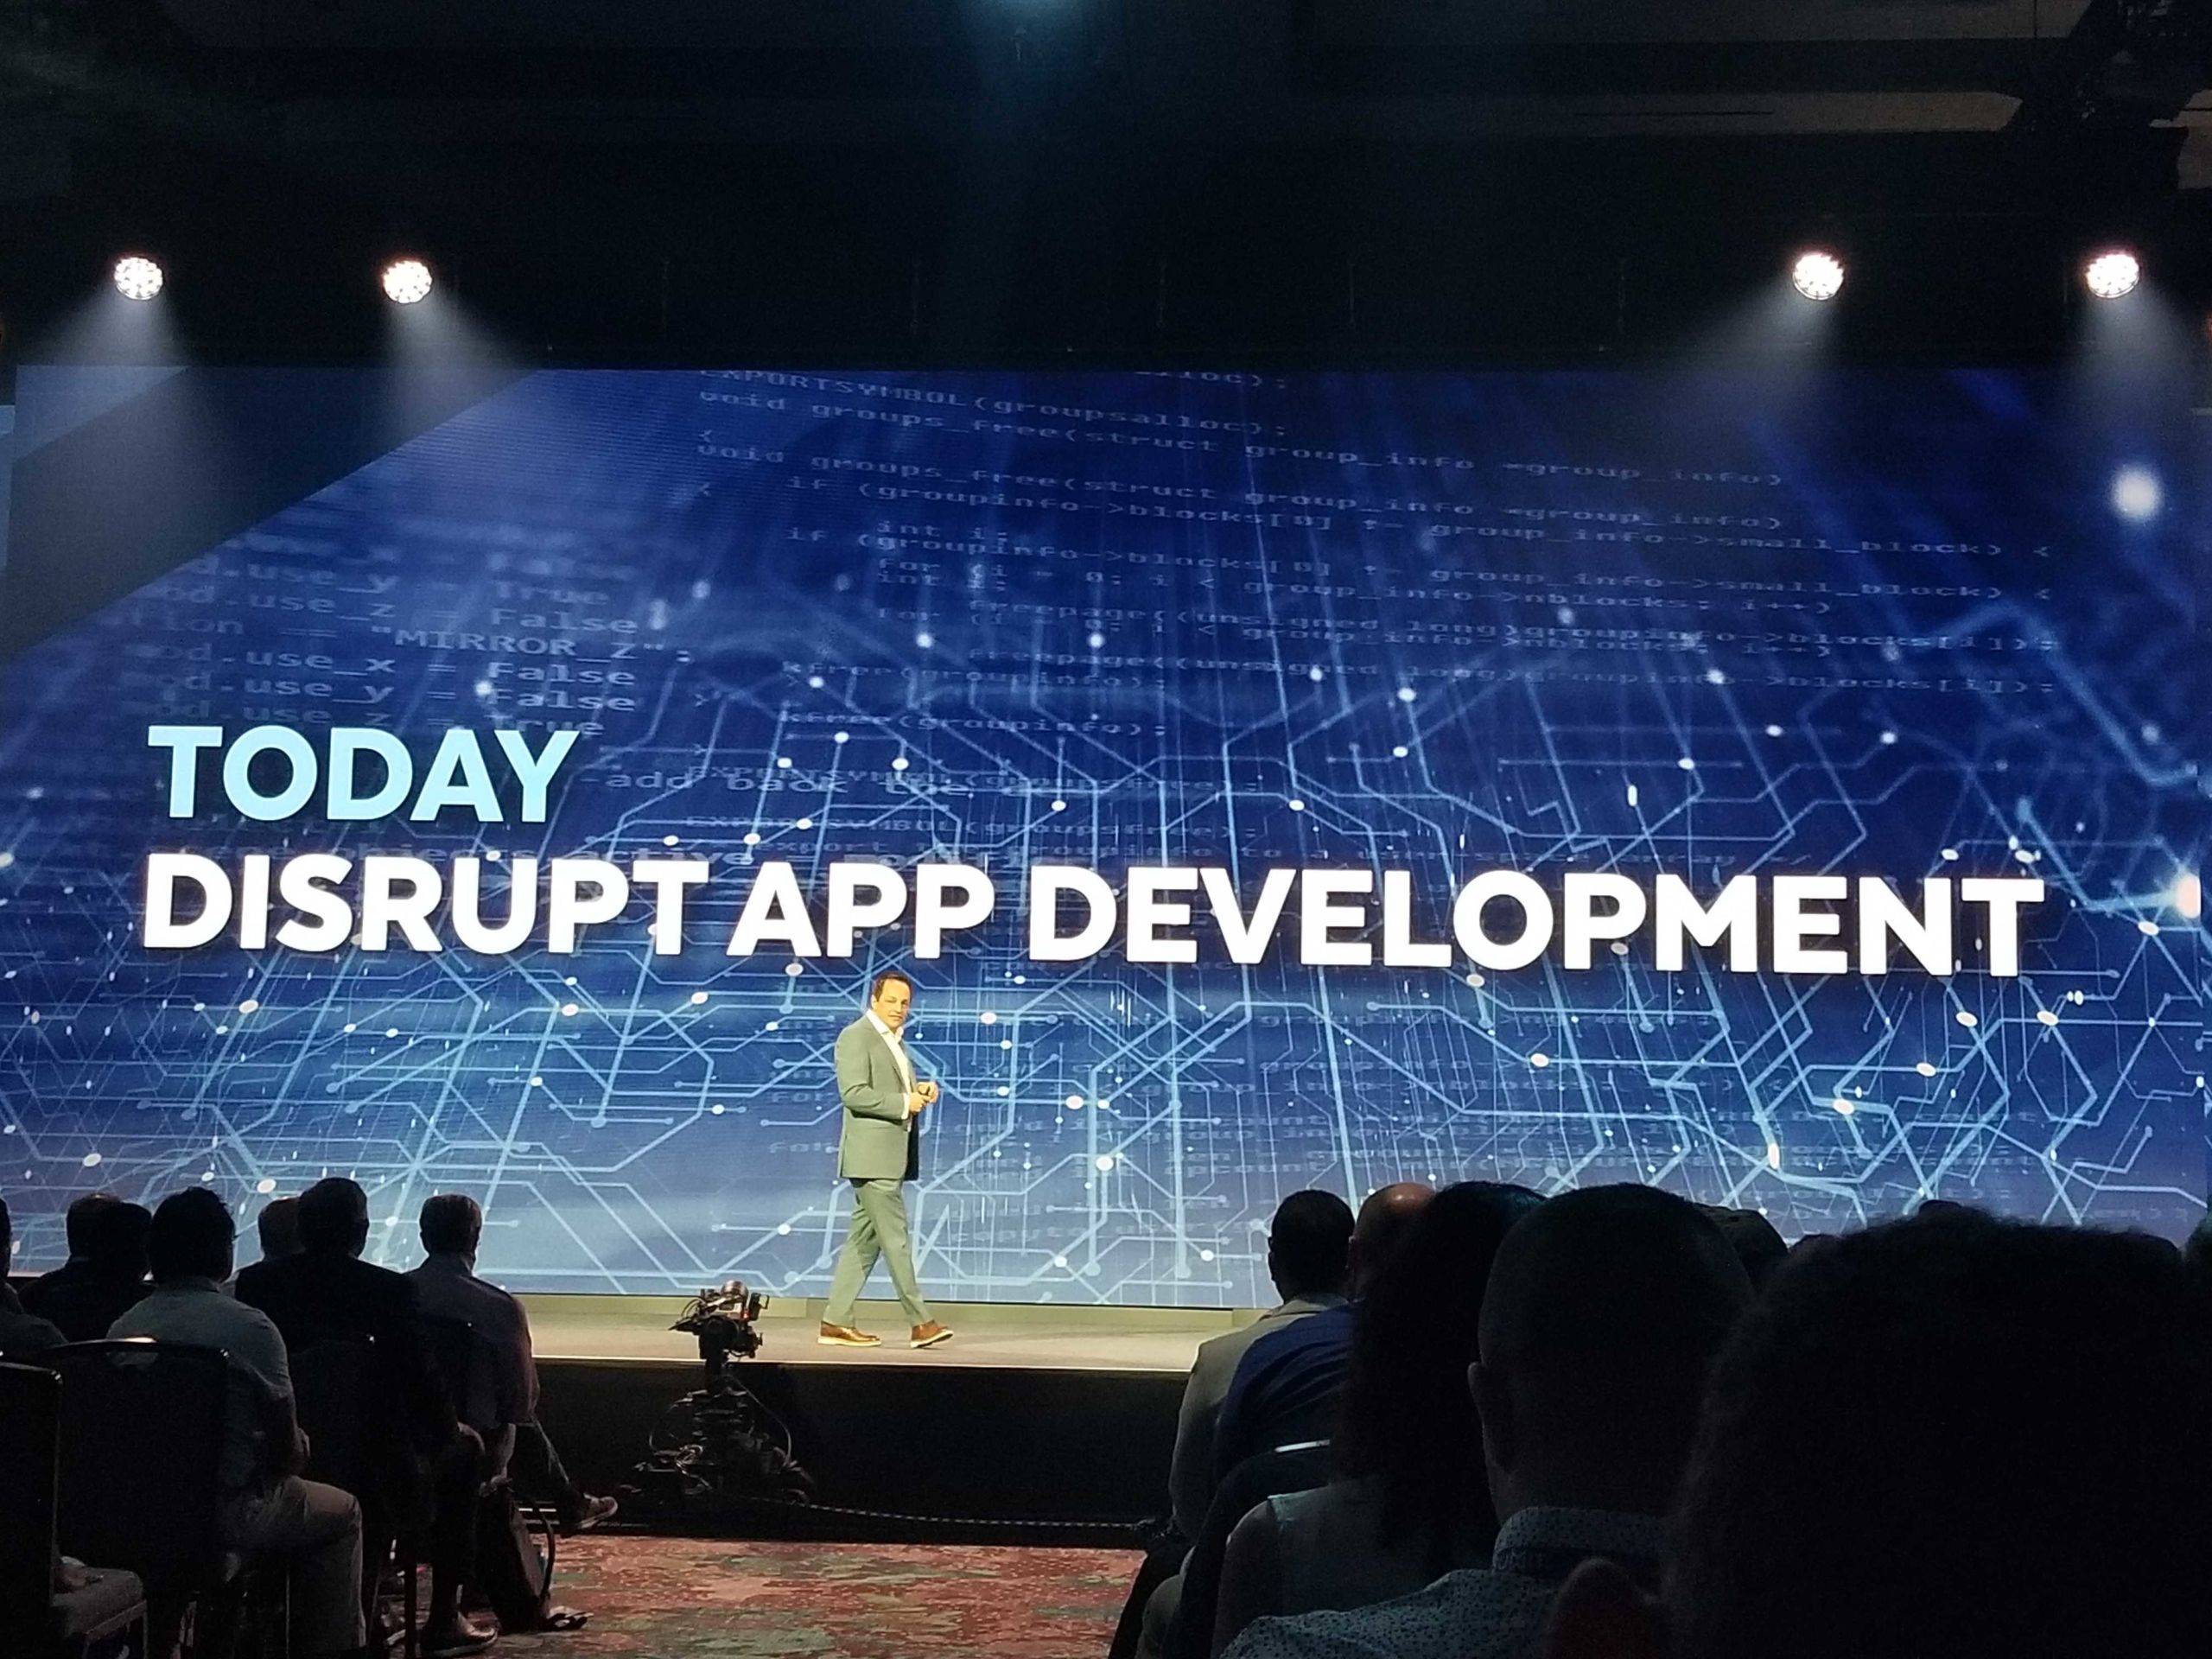 Disrupting application development is the framework Christian Kleinerman gave to this year’s Snowflake Summit. Image courtesy of Monte Carlo.